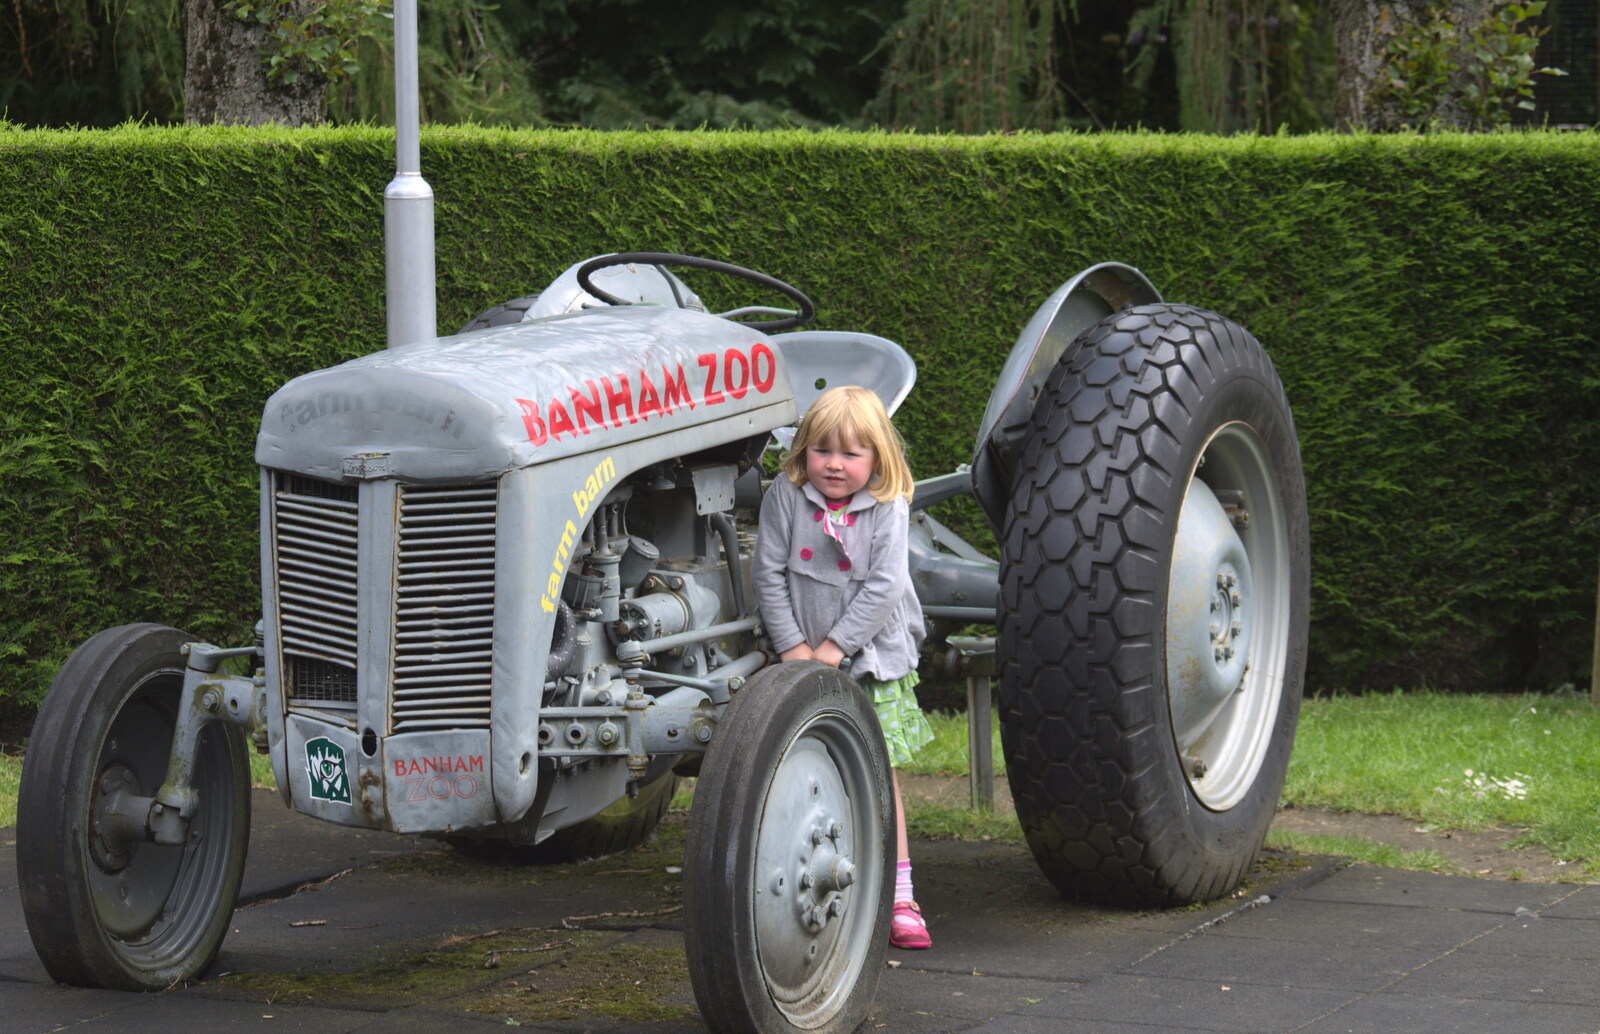 Lydia on the Banham Zoo Fergie tractor from Another Trip to Banham Zoo, Banham, Norfolk - 6th June 2012